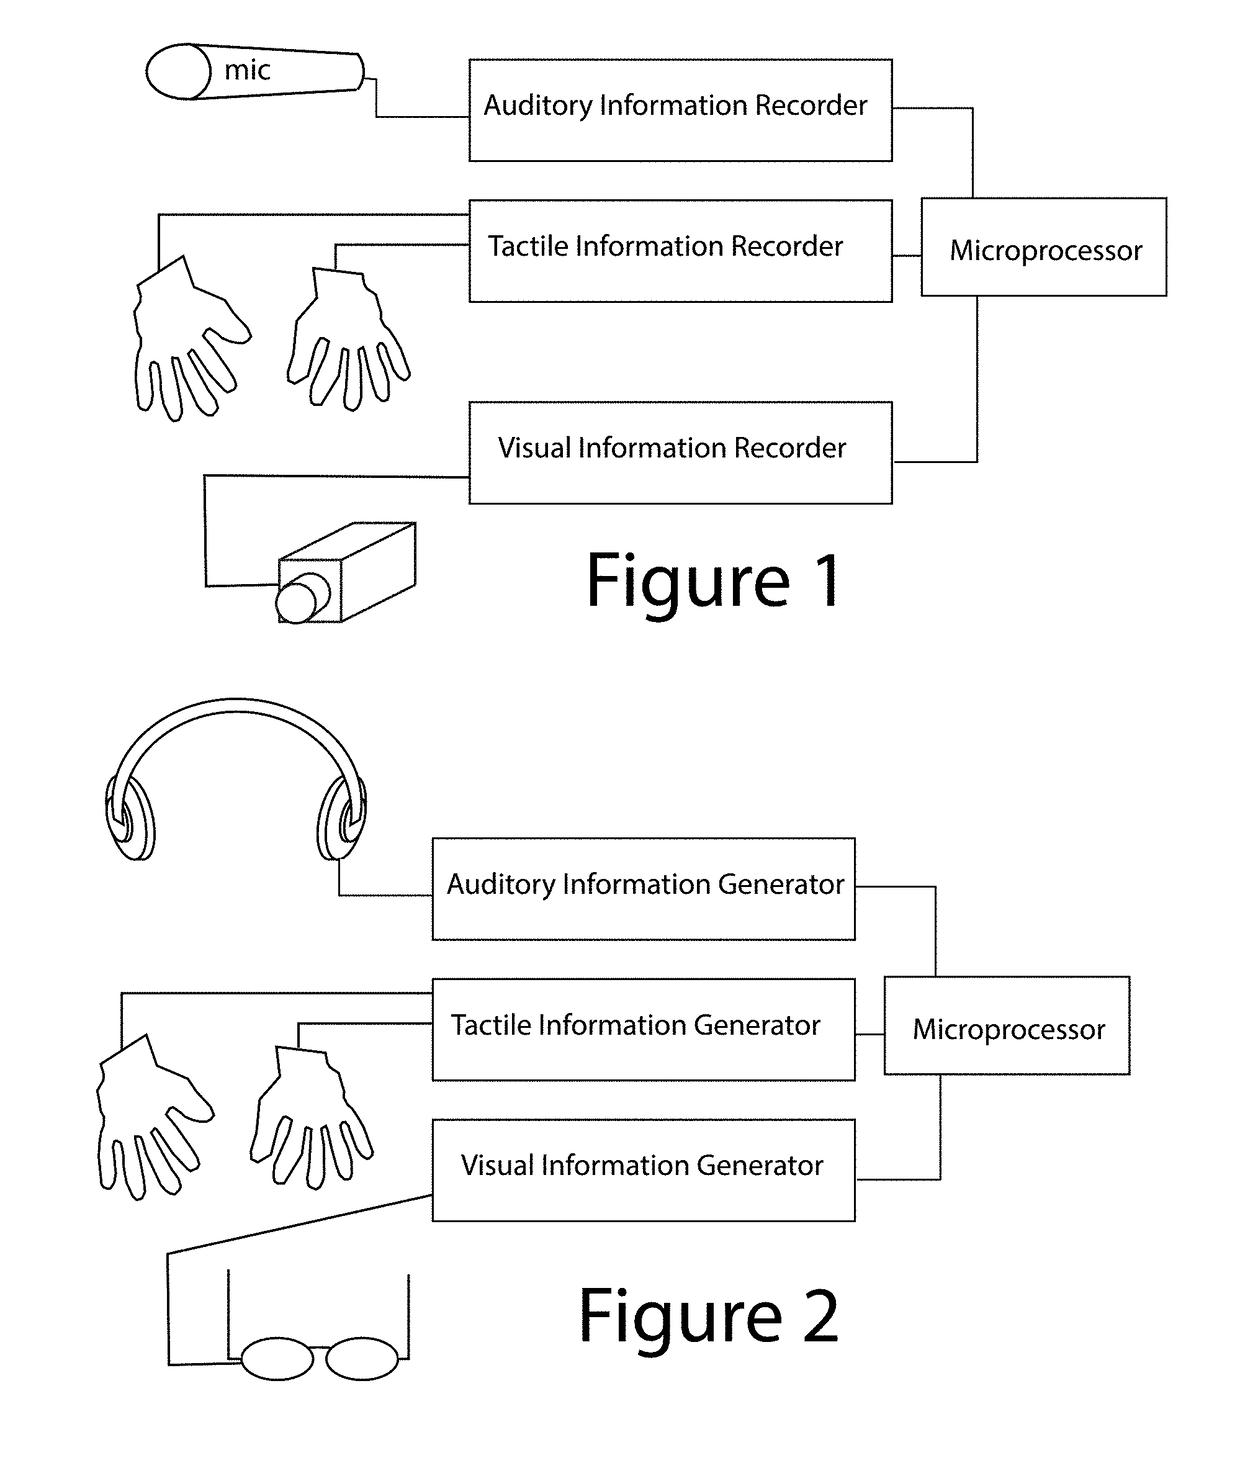 Accelerated Learning, Entertainment and Cognitive Therapy Using Augmented Reality Comprising Combined Haptic, Auditory, and Visual Stimulation